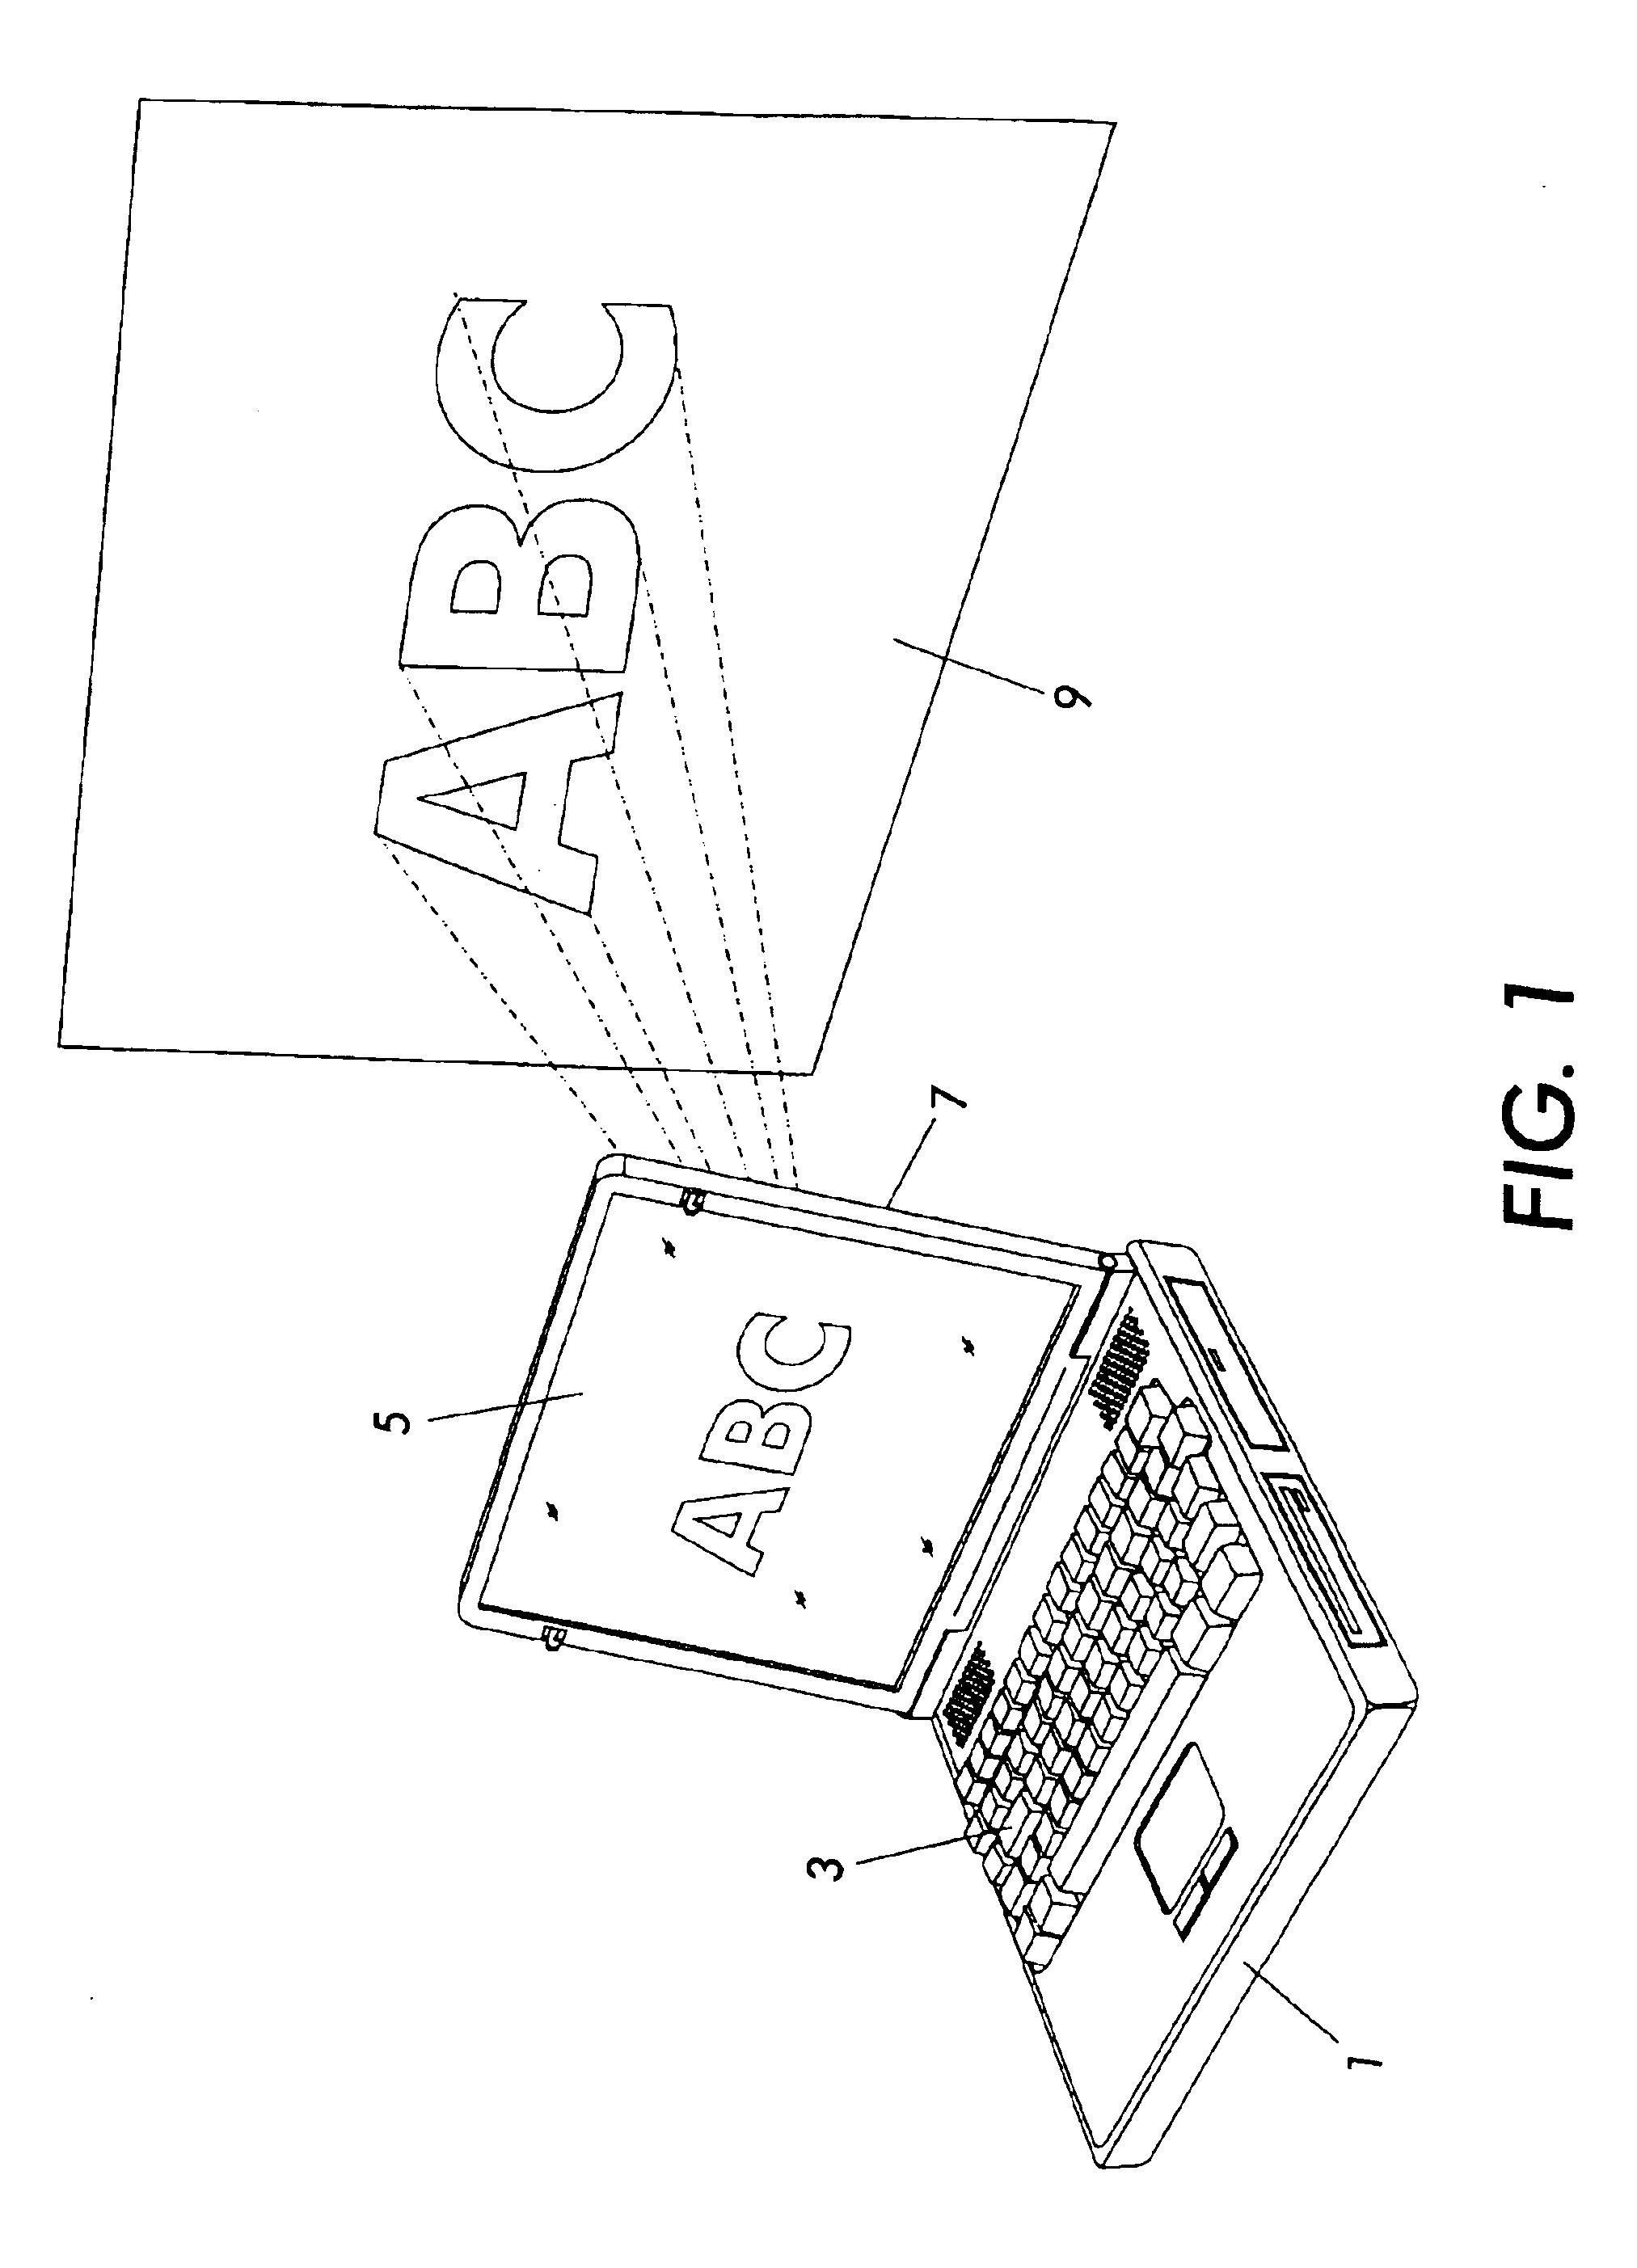 Portable personal computing device with fully integrated projection display system